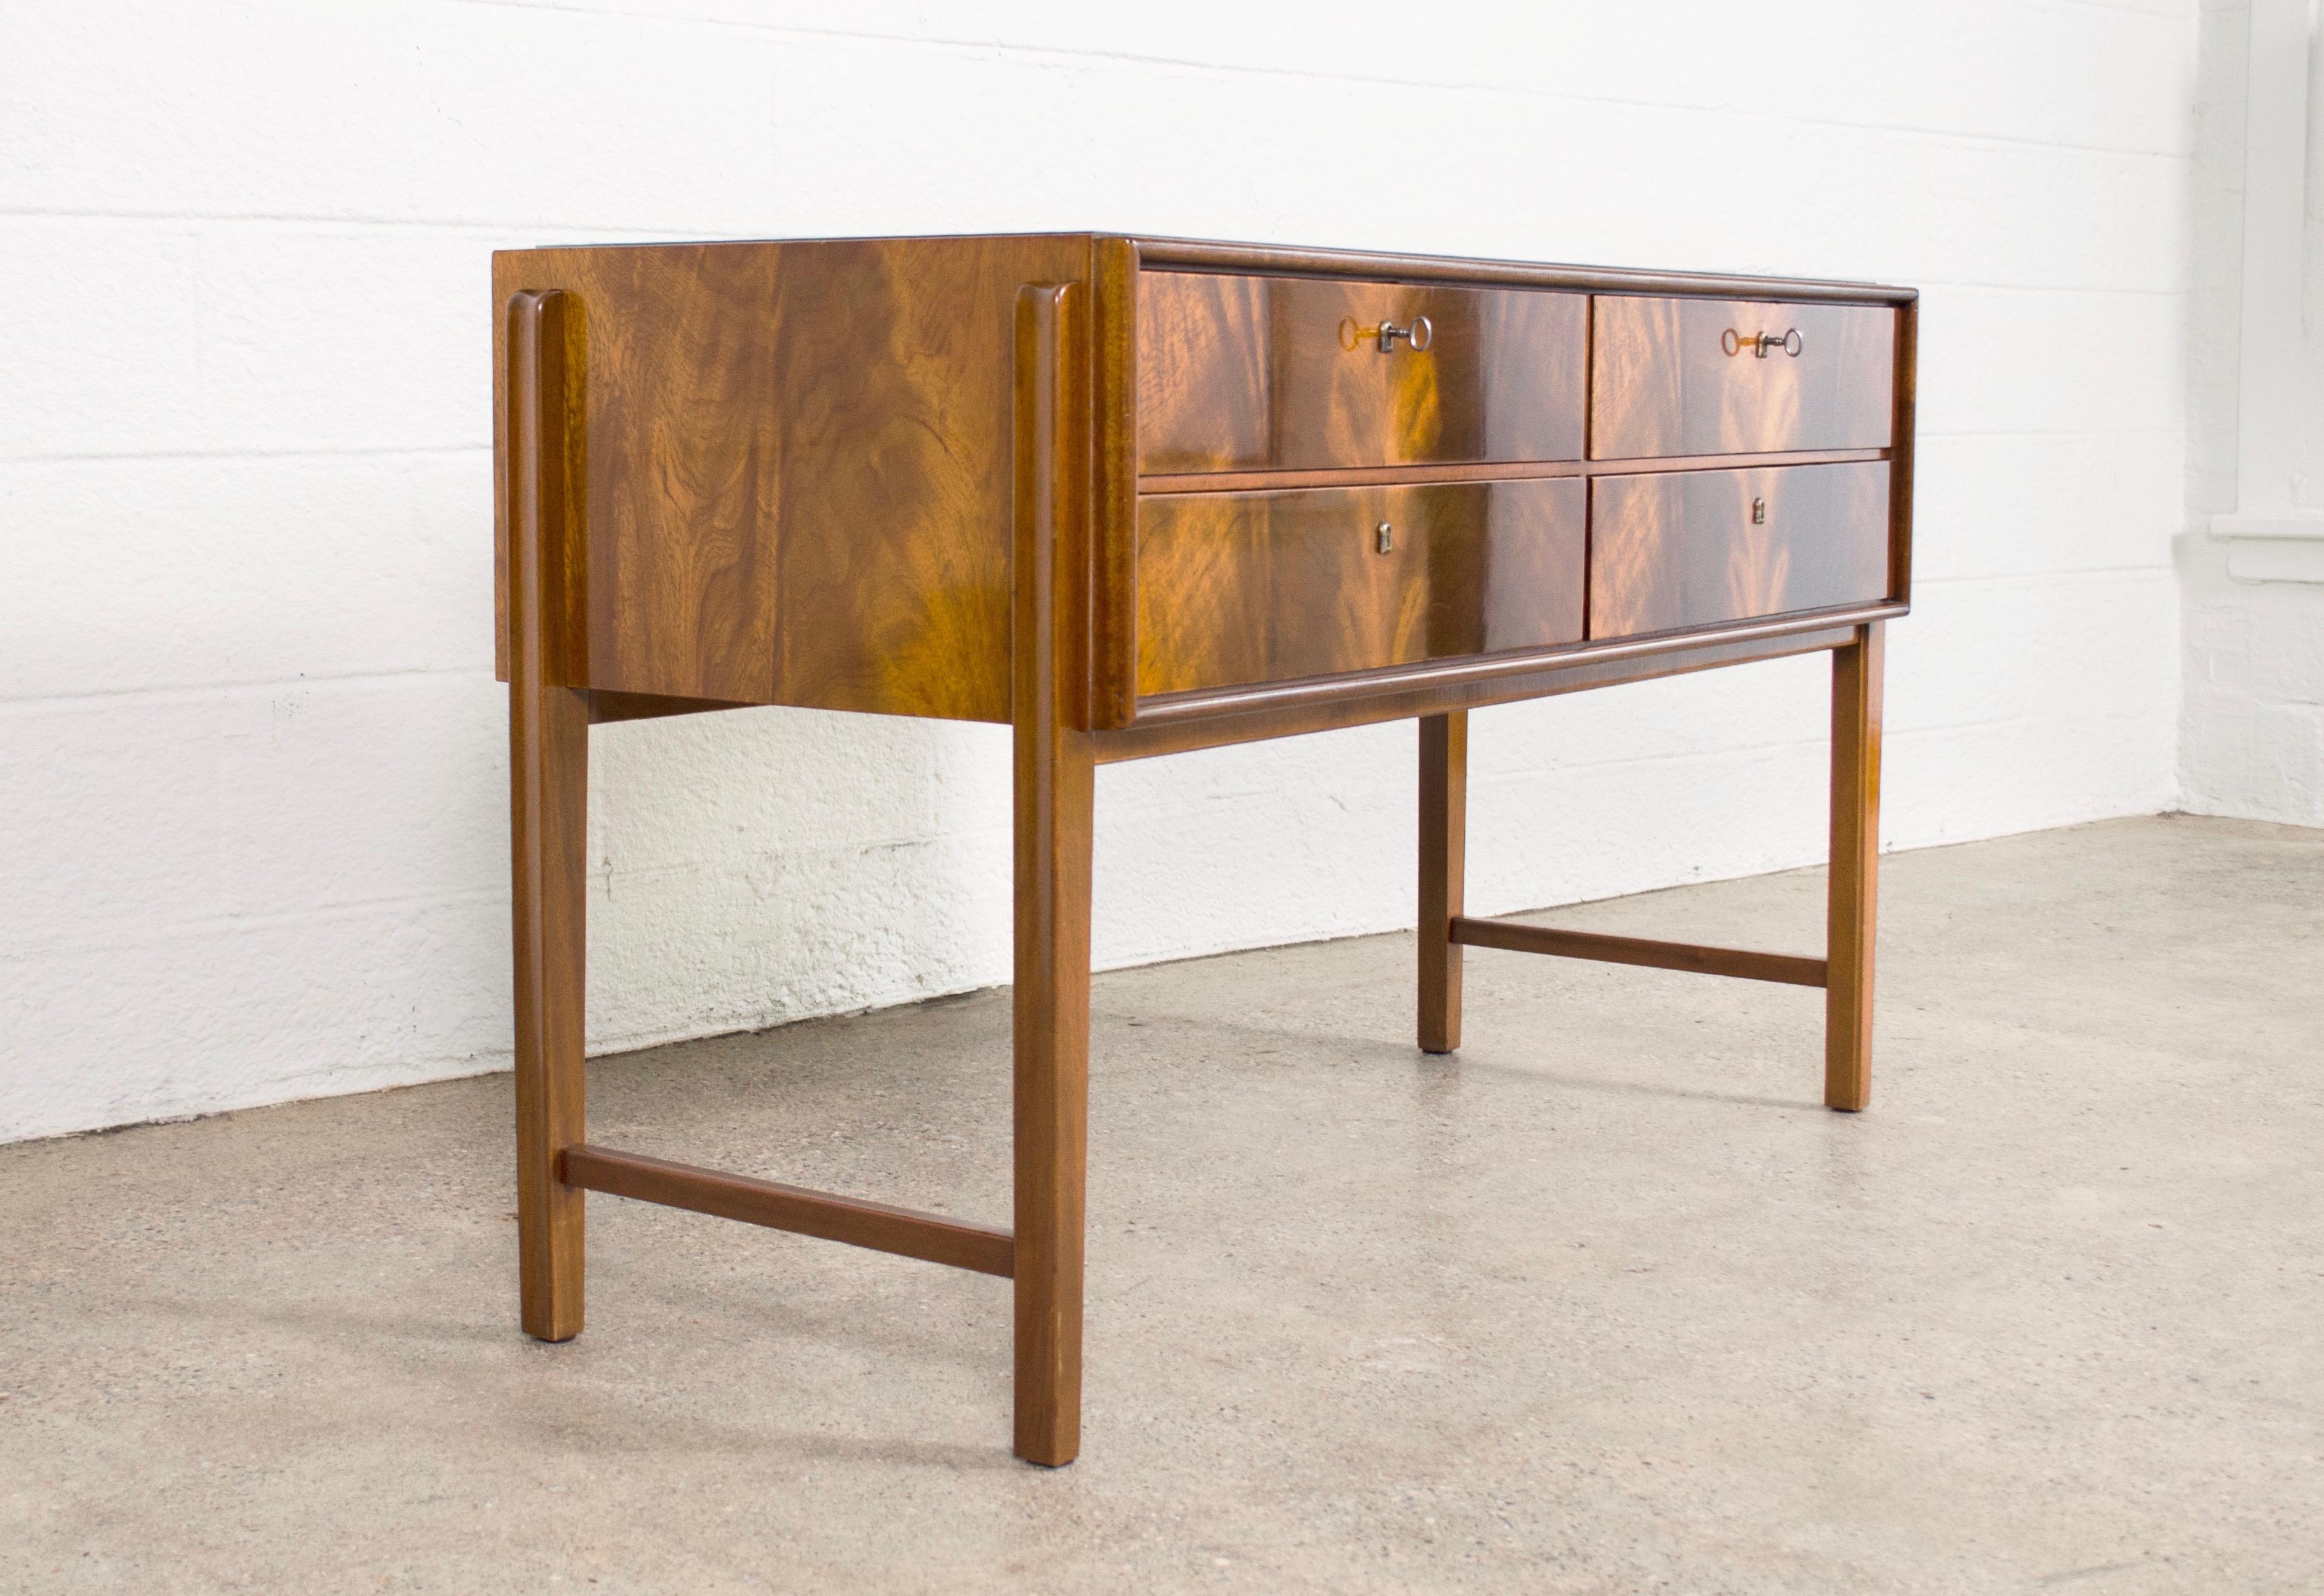 Midcentury Burl Wood Sideboard Credenza with Glass Top, 1960s For Sale 1